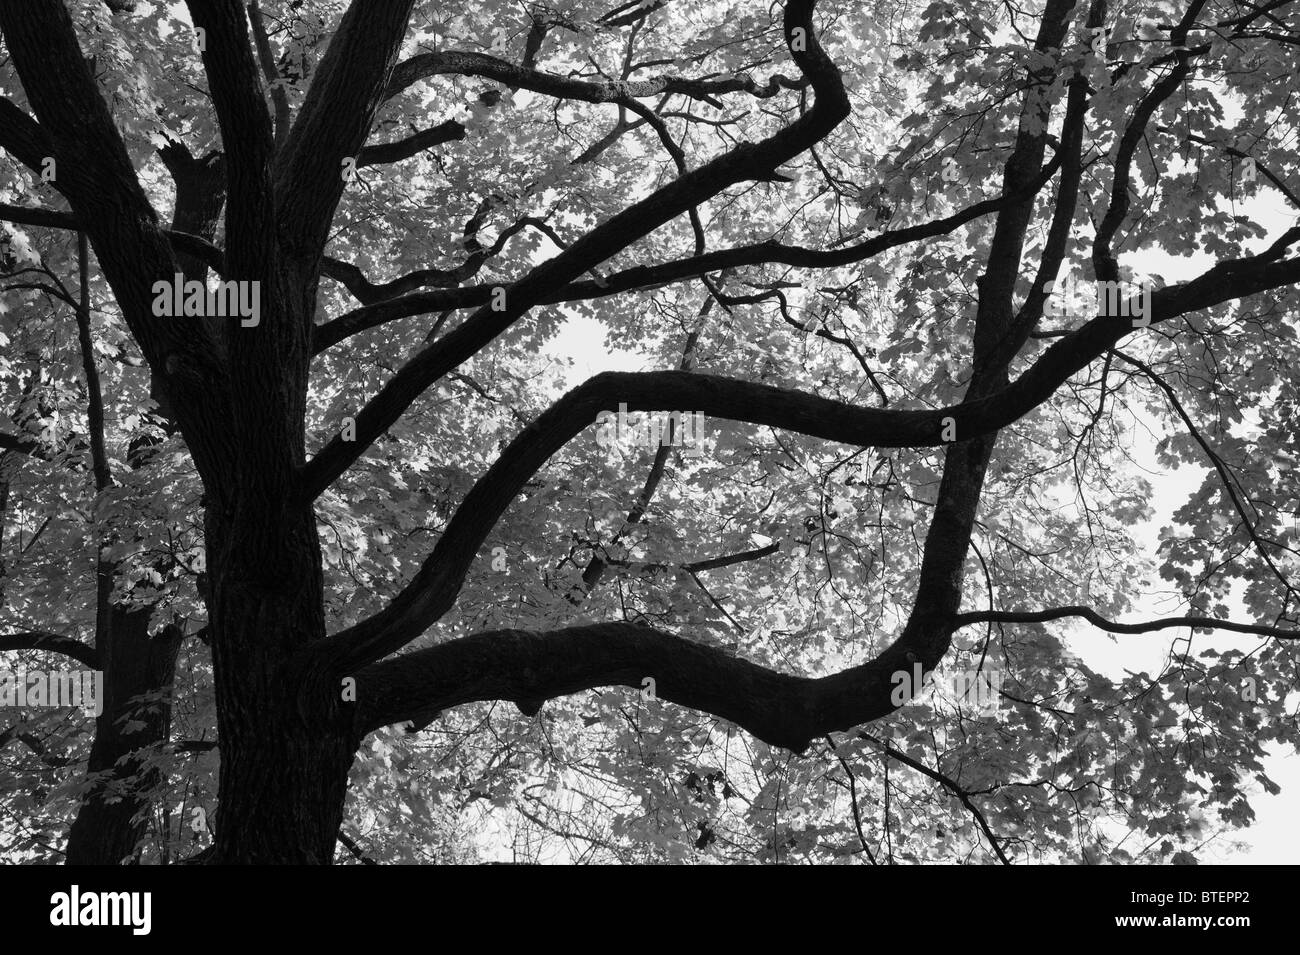 Silhouette like dark branches and trunk of a beech tree during autumn / fall in an old graveyard in Munich, Germany Stock Photo